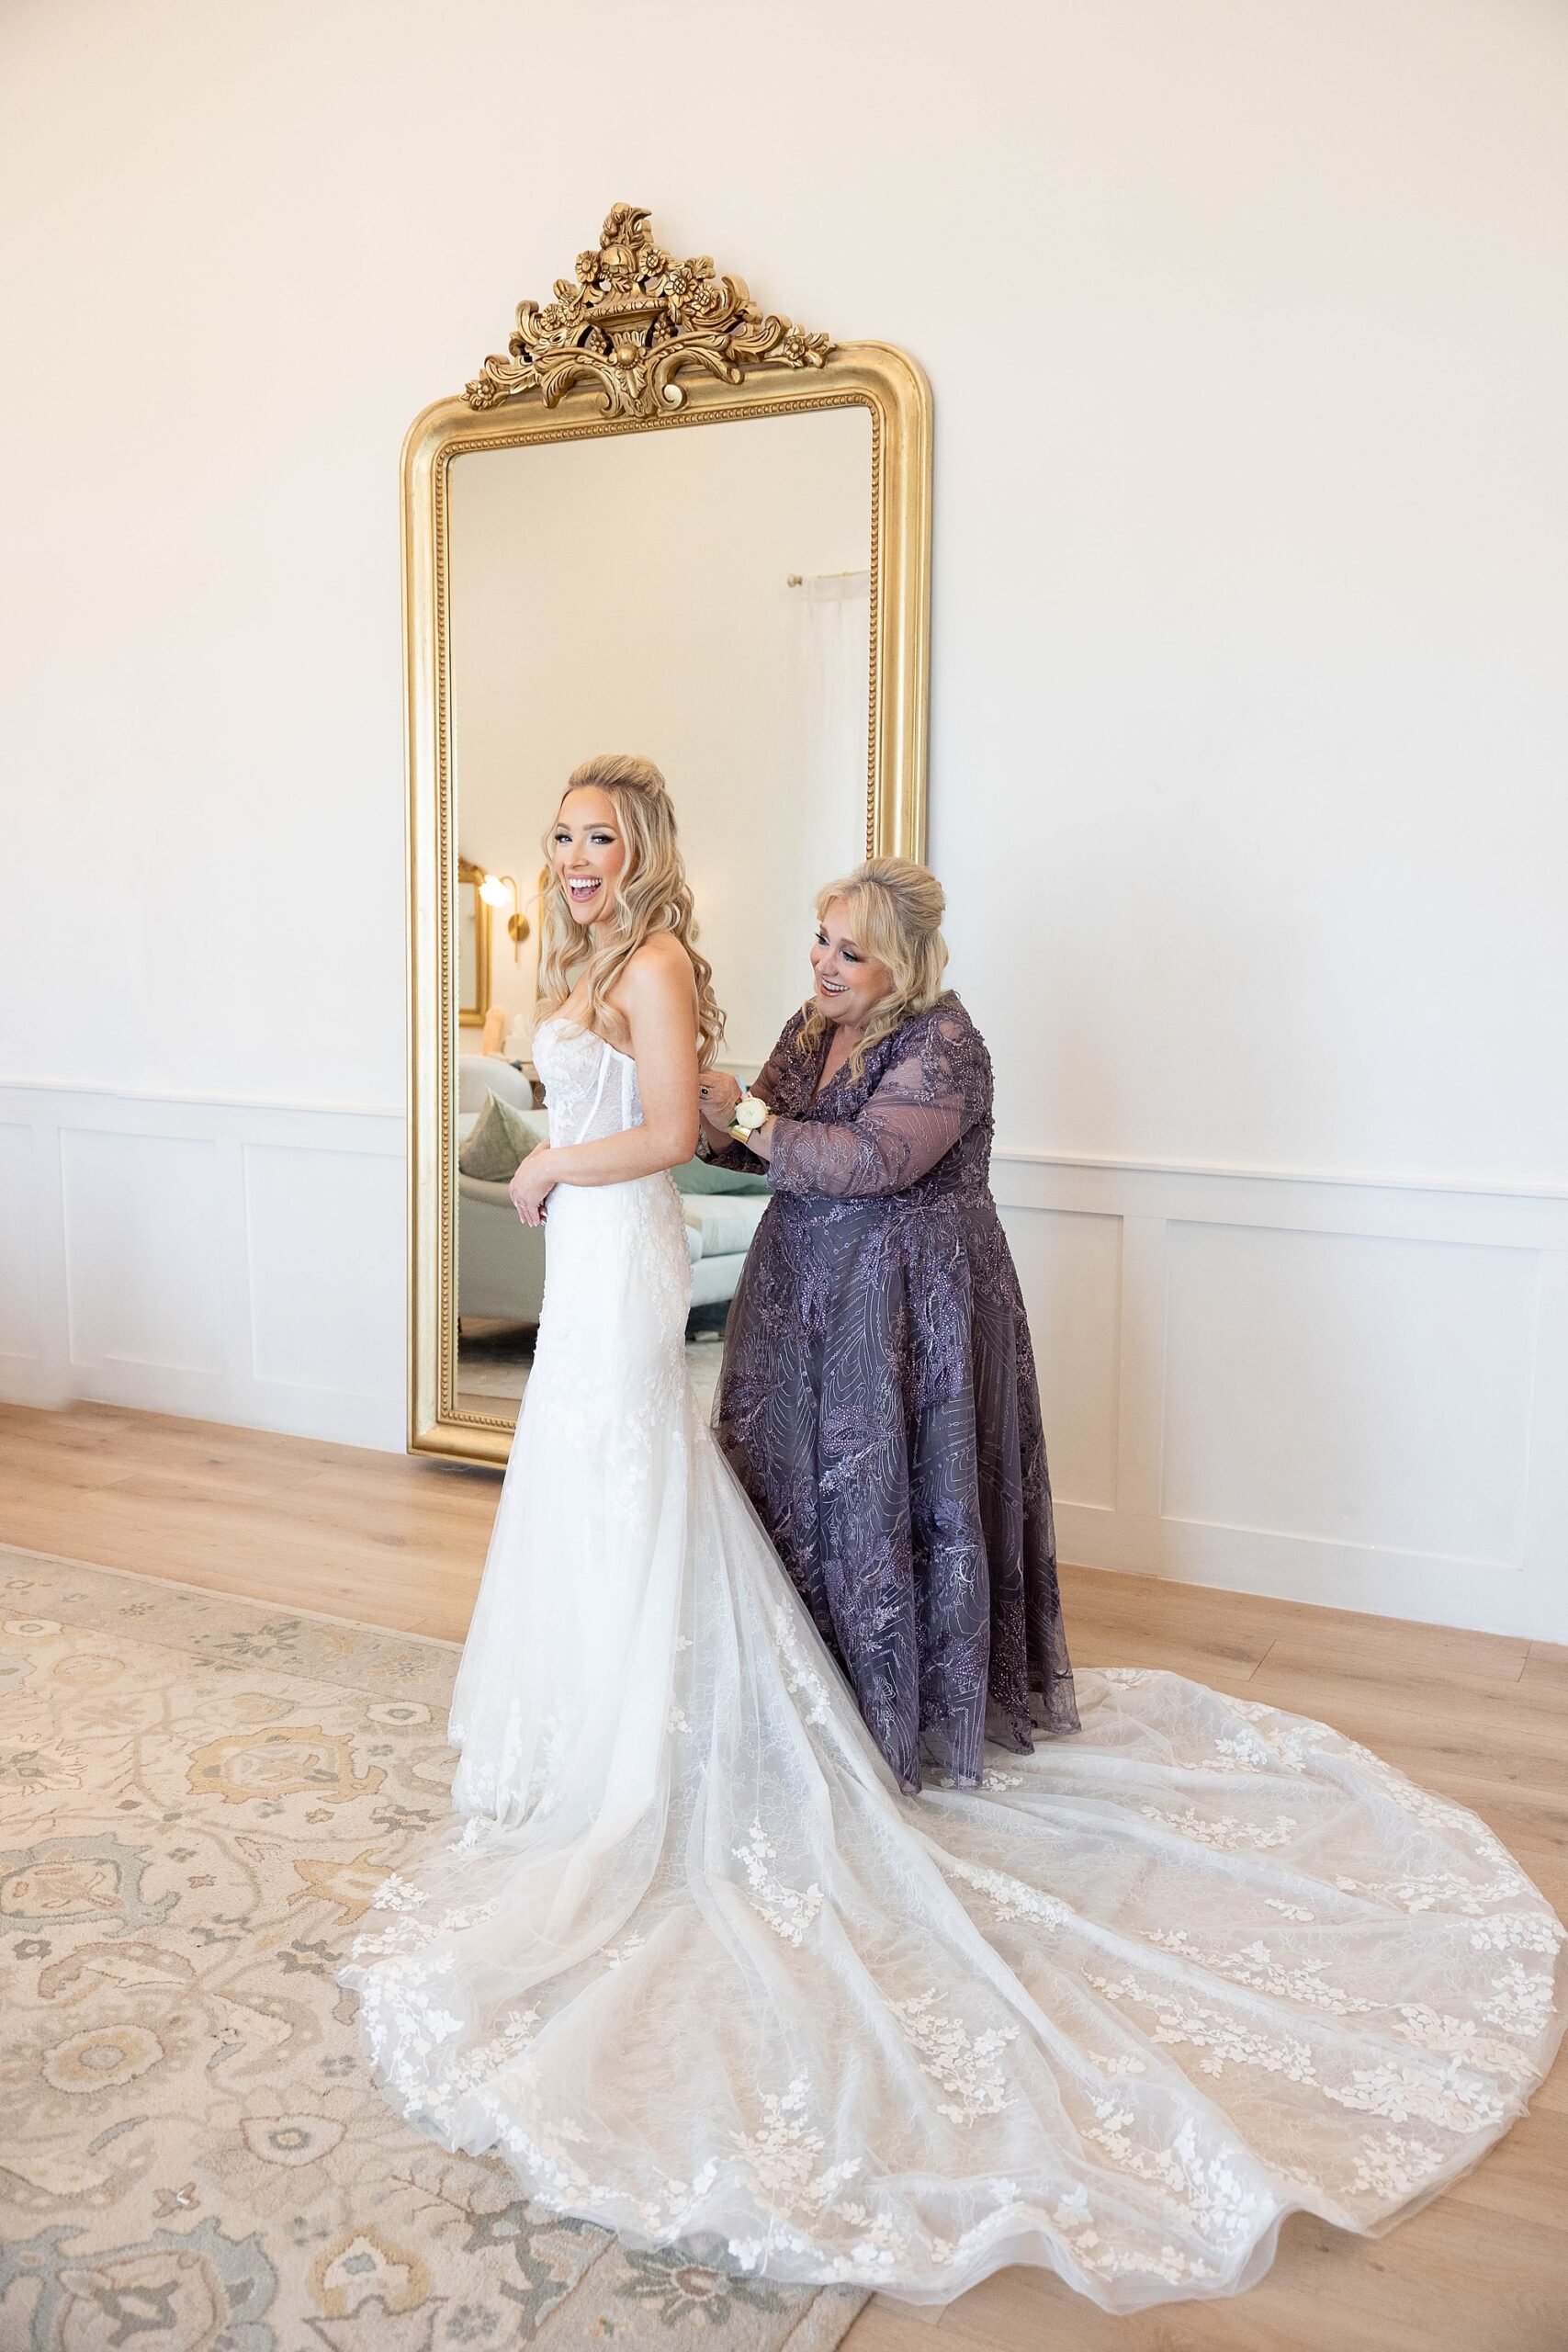 mother helps bride into wedding dress during prep at the Gardenia